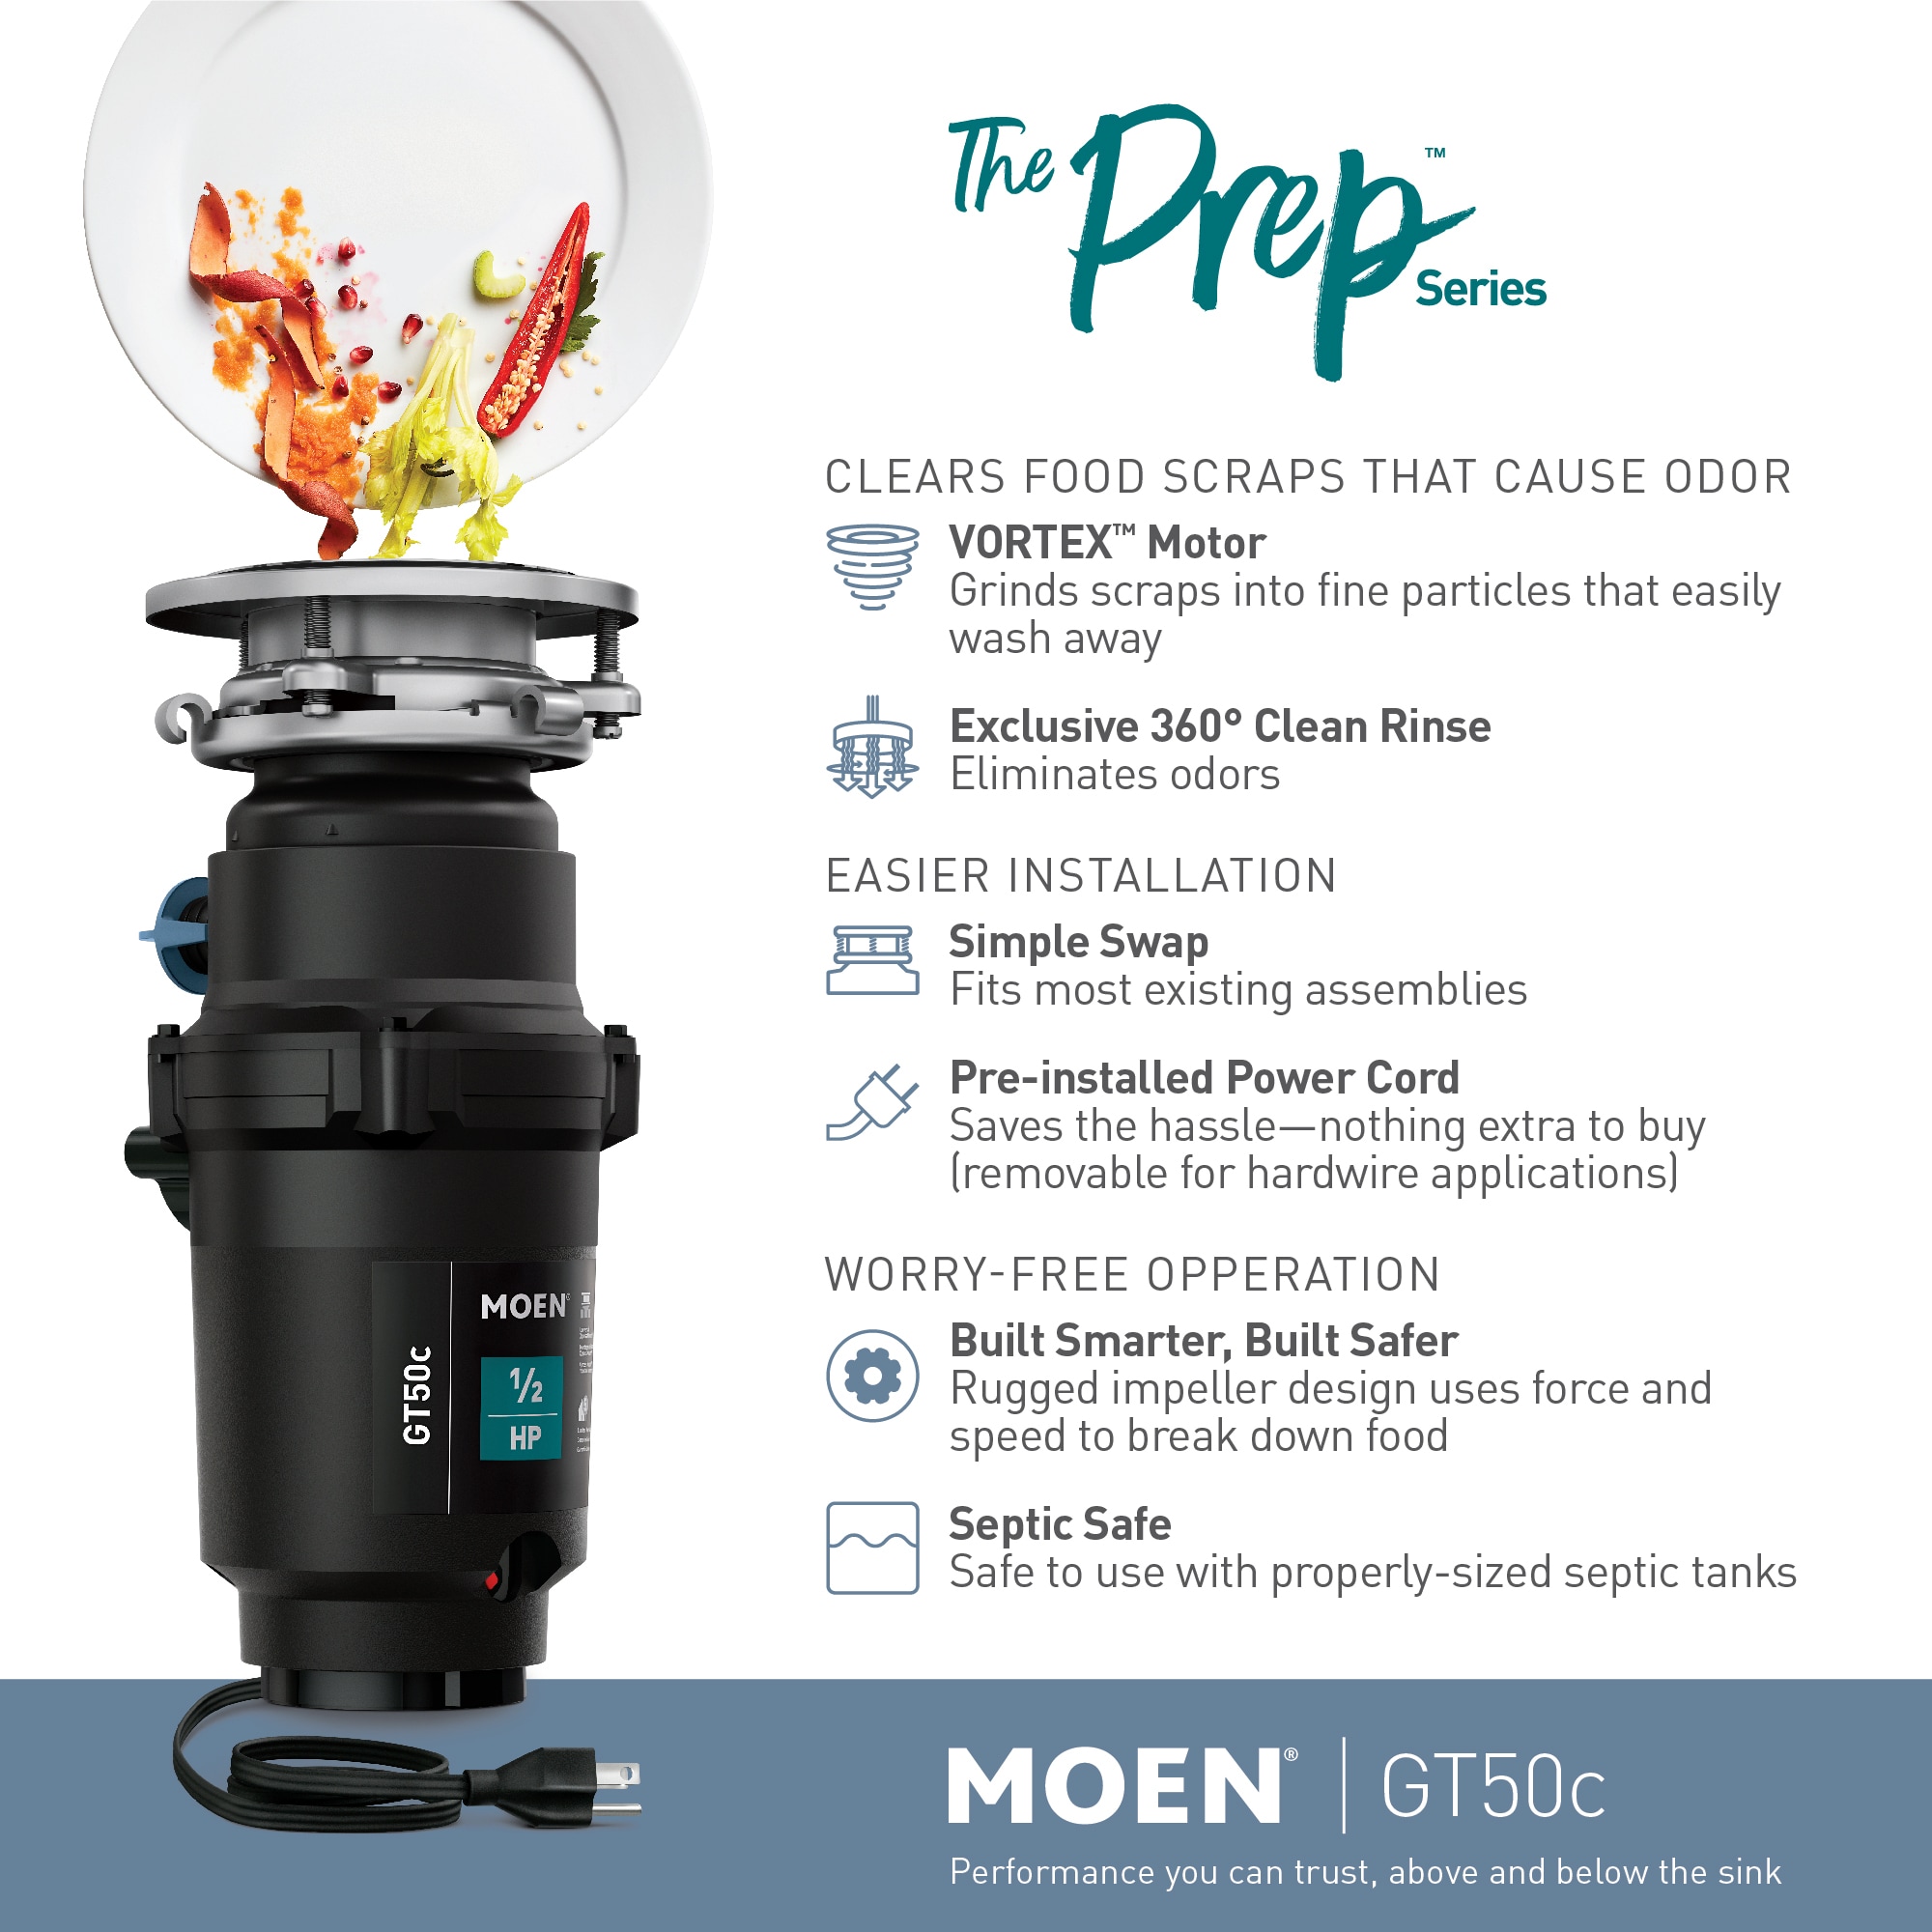 Moen GT50C Prep Series Horsepower Continuous Feed Garbage Disposal featuring Fast Track Technology, Power Cord Included - 2